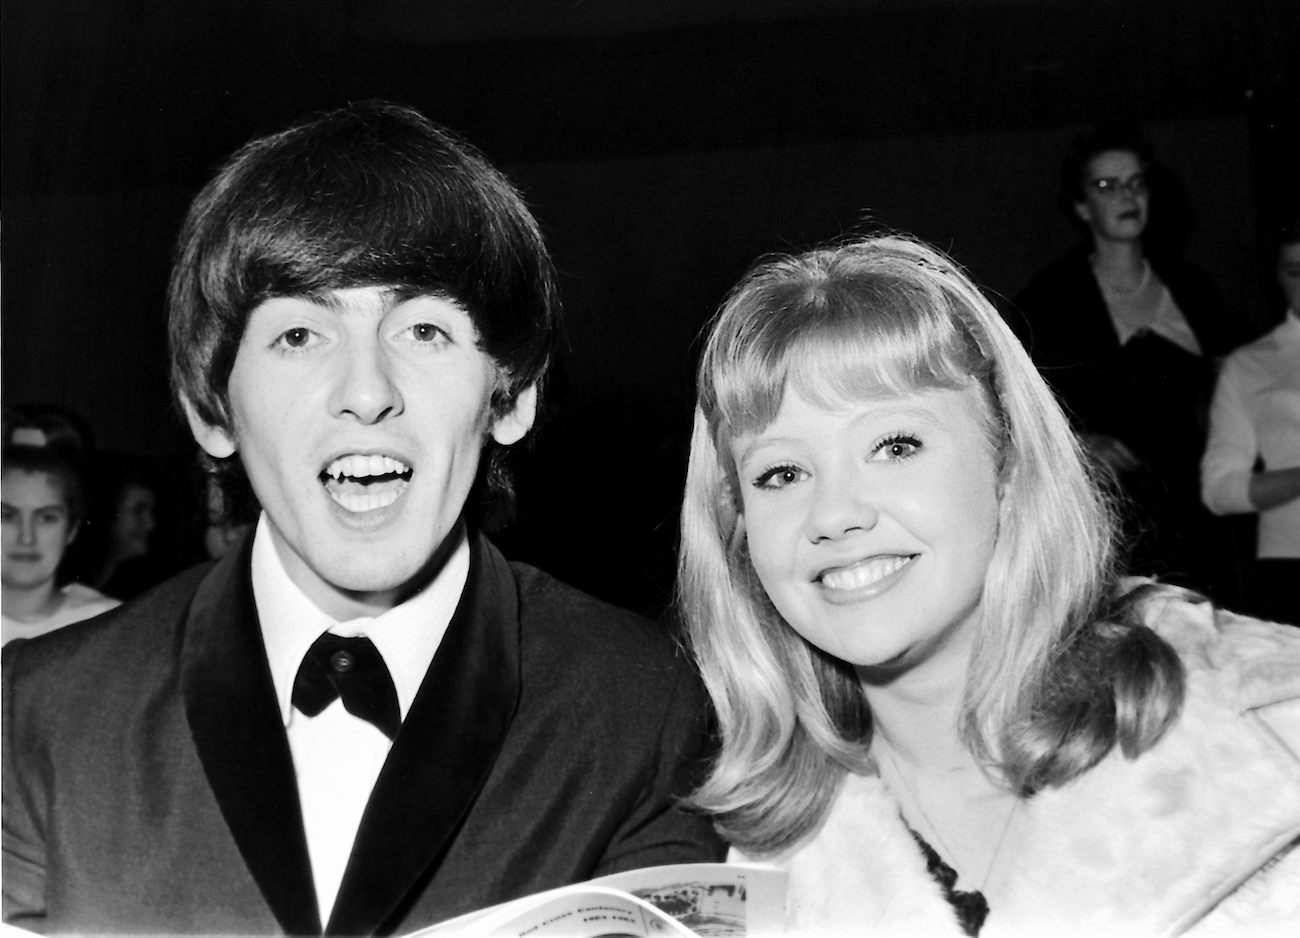 George Harrison and Hayley Mills at the Regal Cinema for a viewing of 'Charade' in 1964.